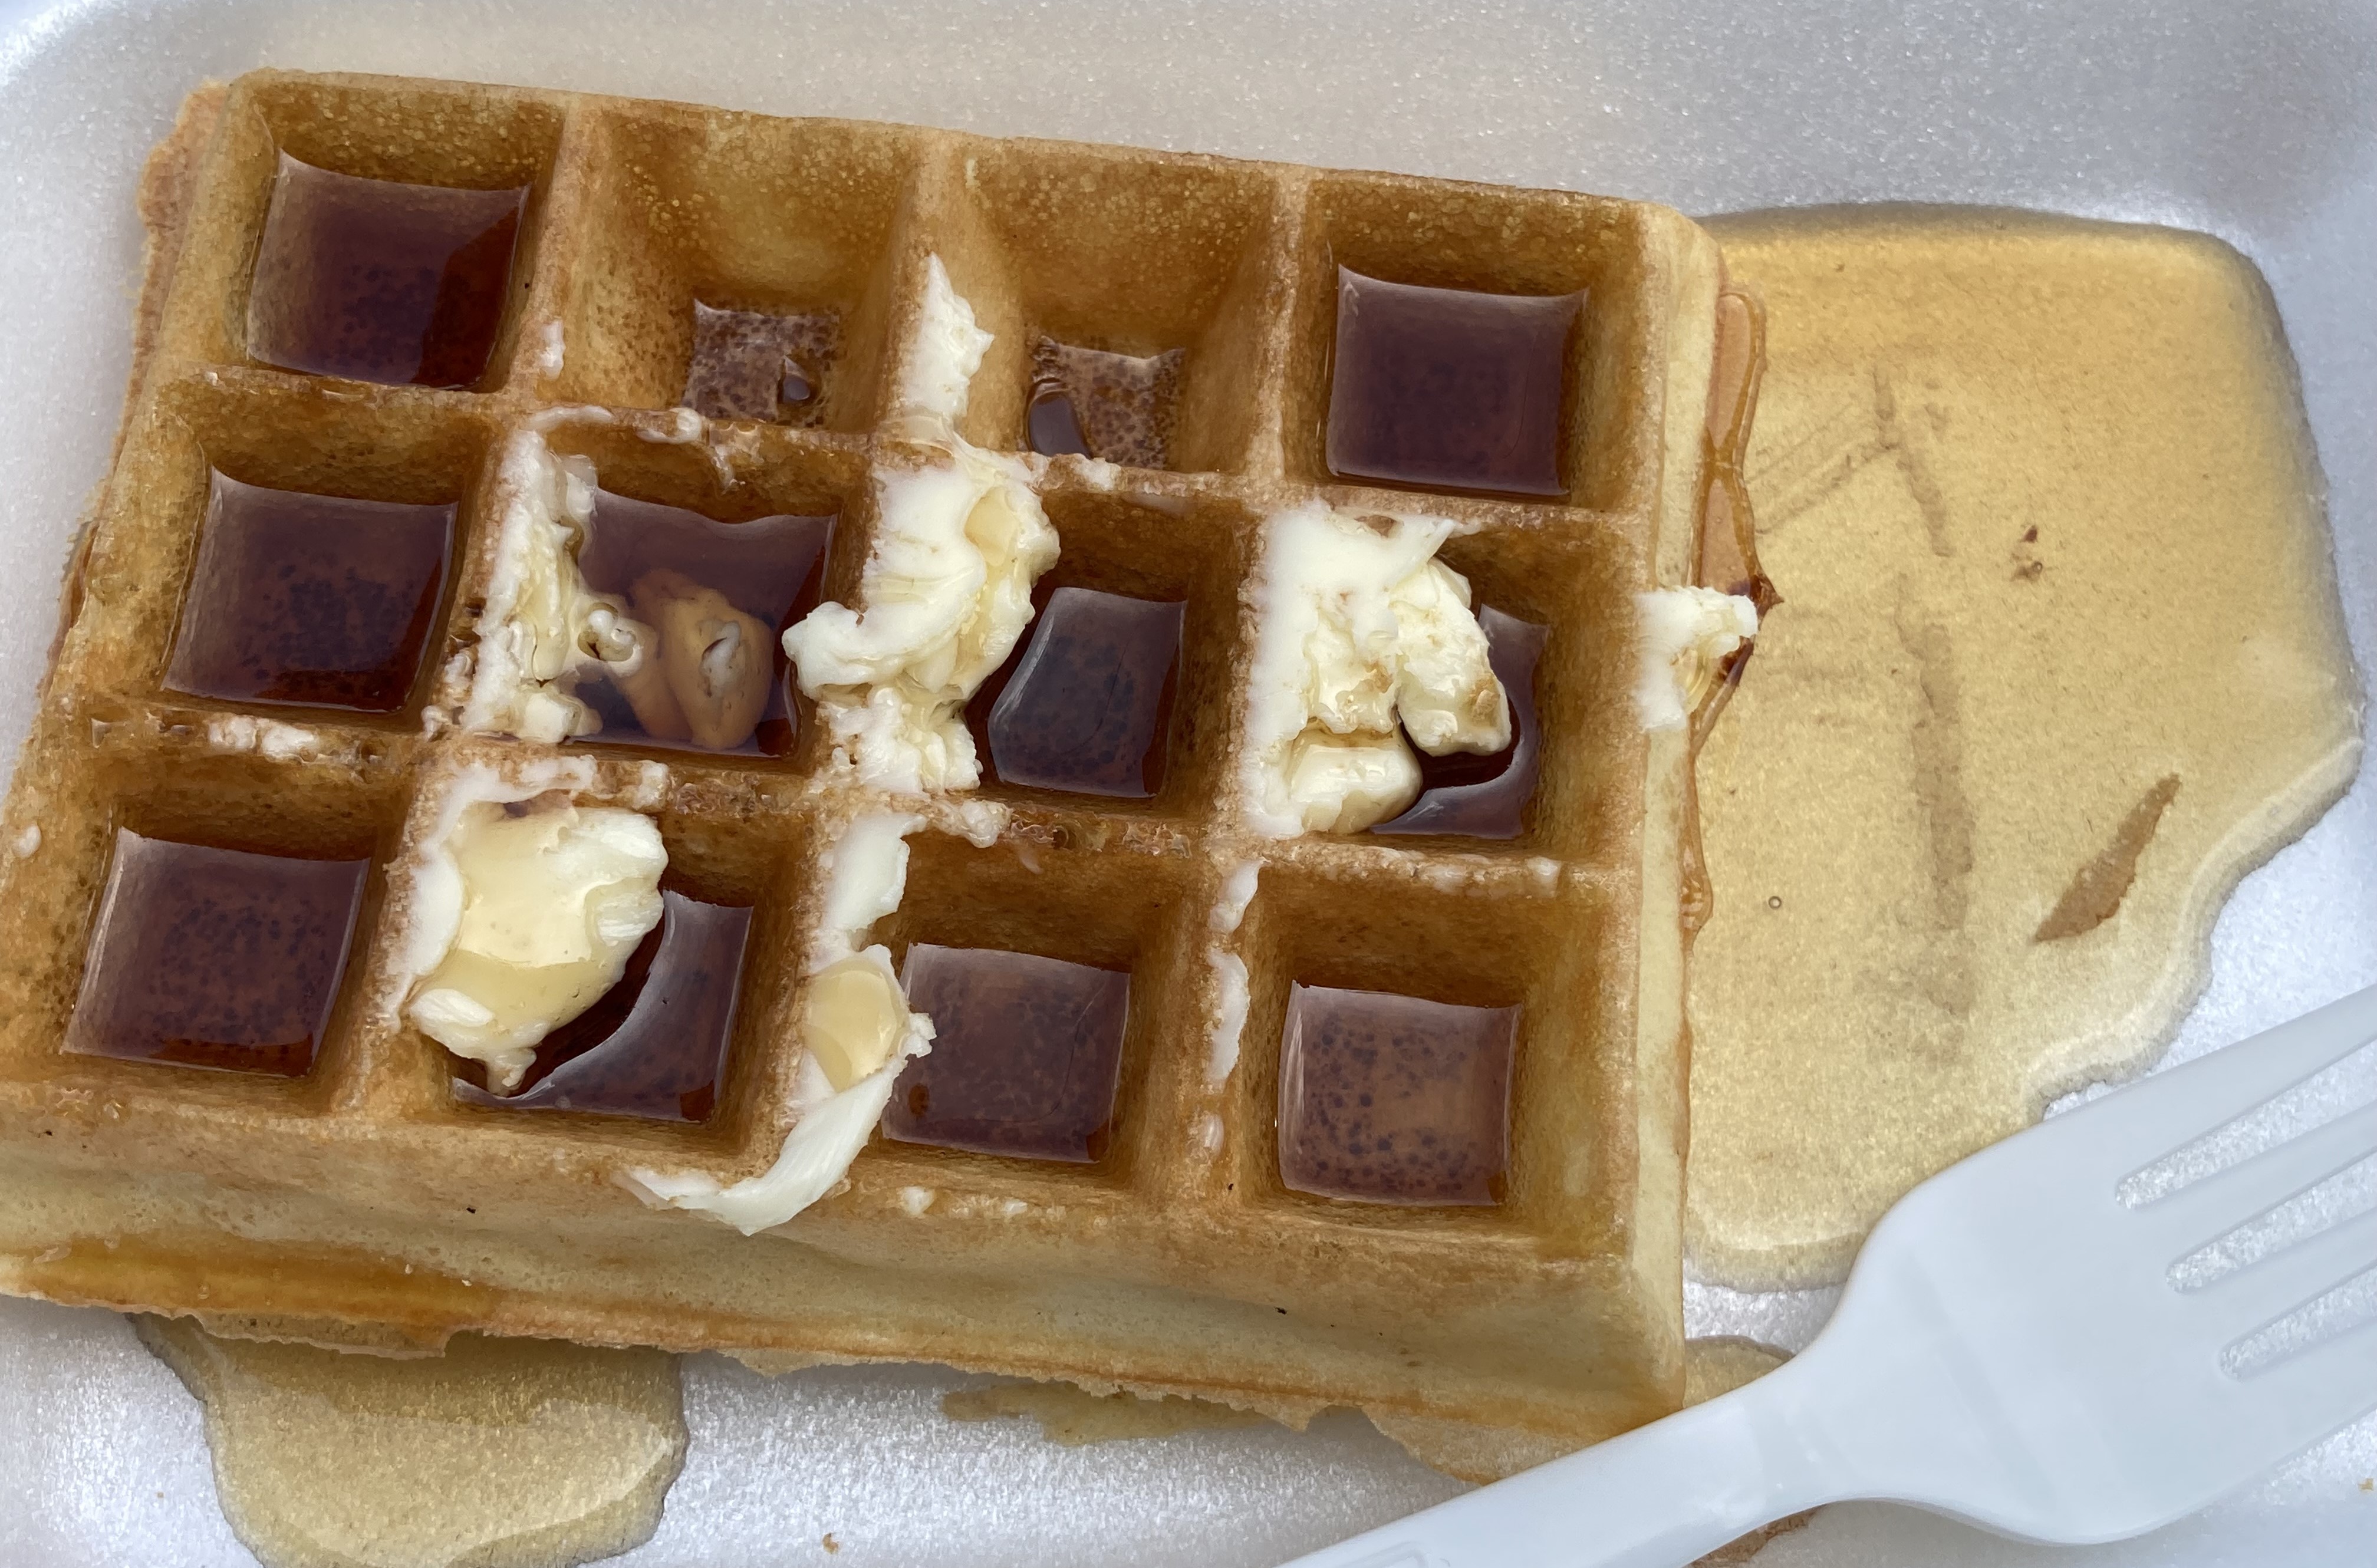 Maurice's in the dairy building serves waffles. This one is with butter and syrup.
(Donna Ditota photo)